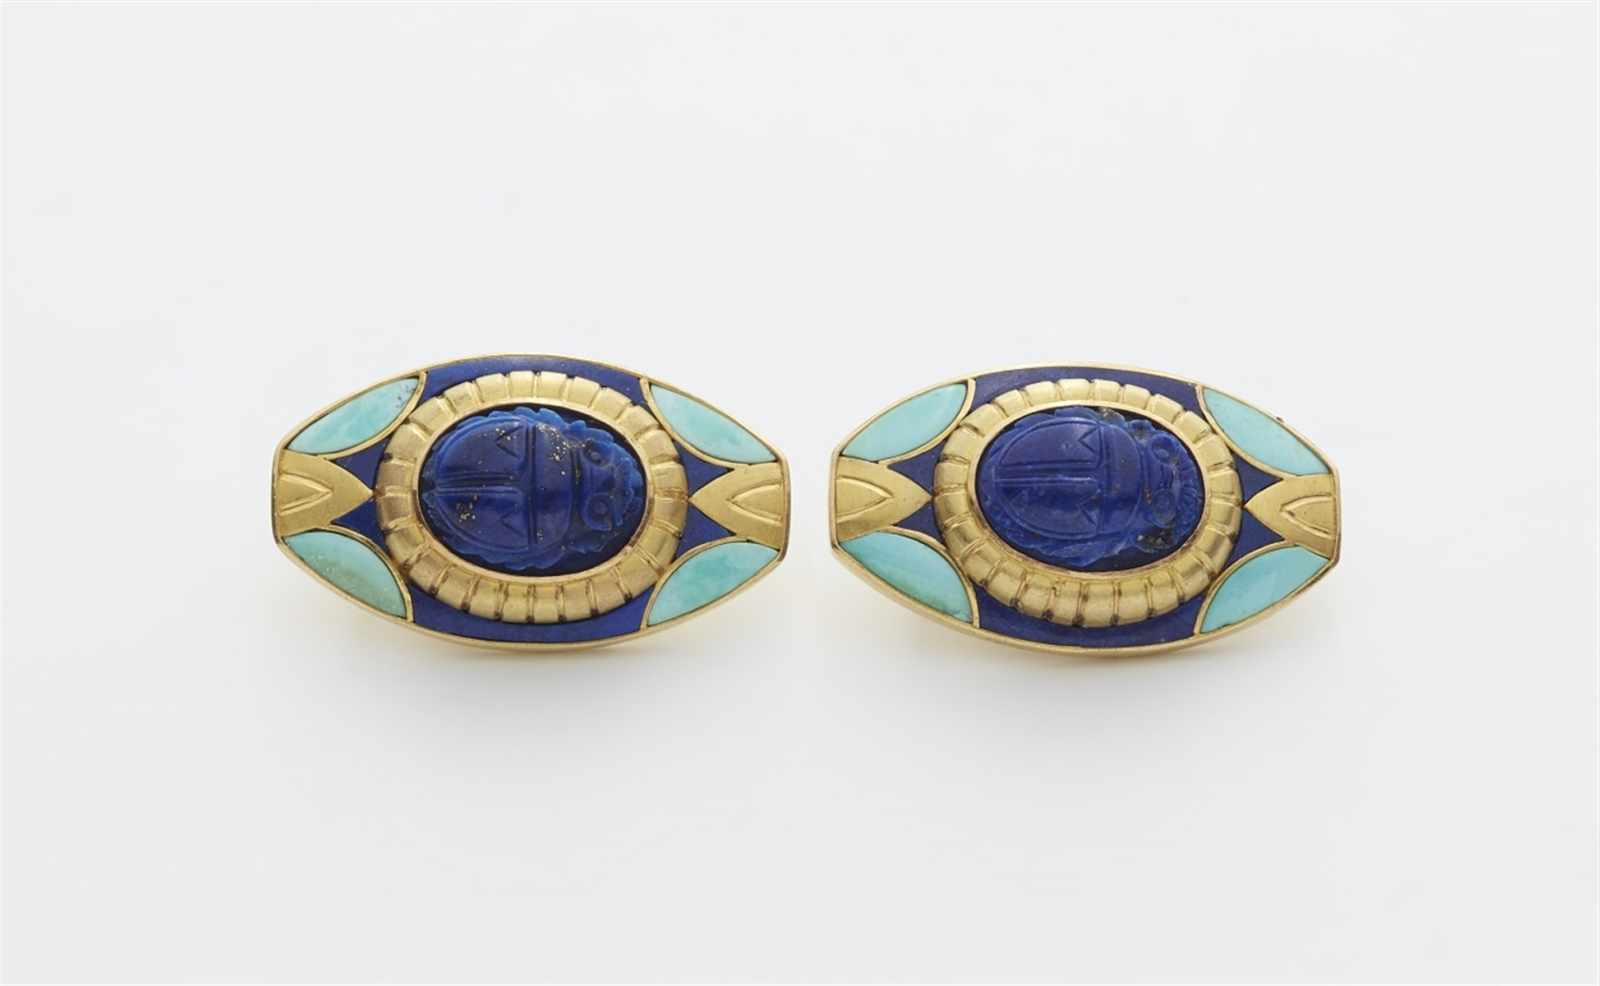 A pair of Egyptian style 18k gold clip earringsMatching pieces to the bracelet. Hand-forged earrings